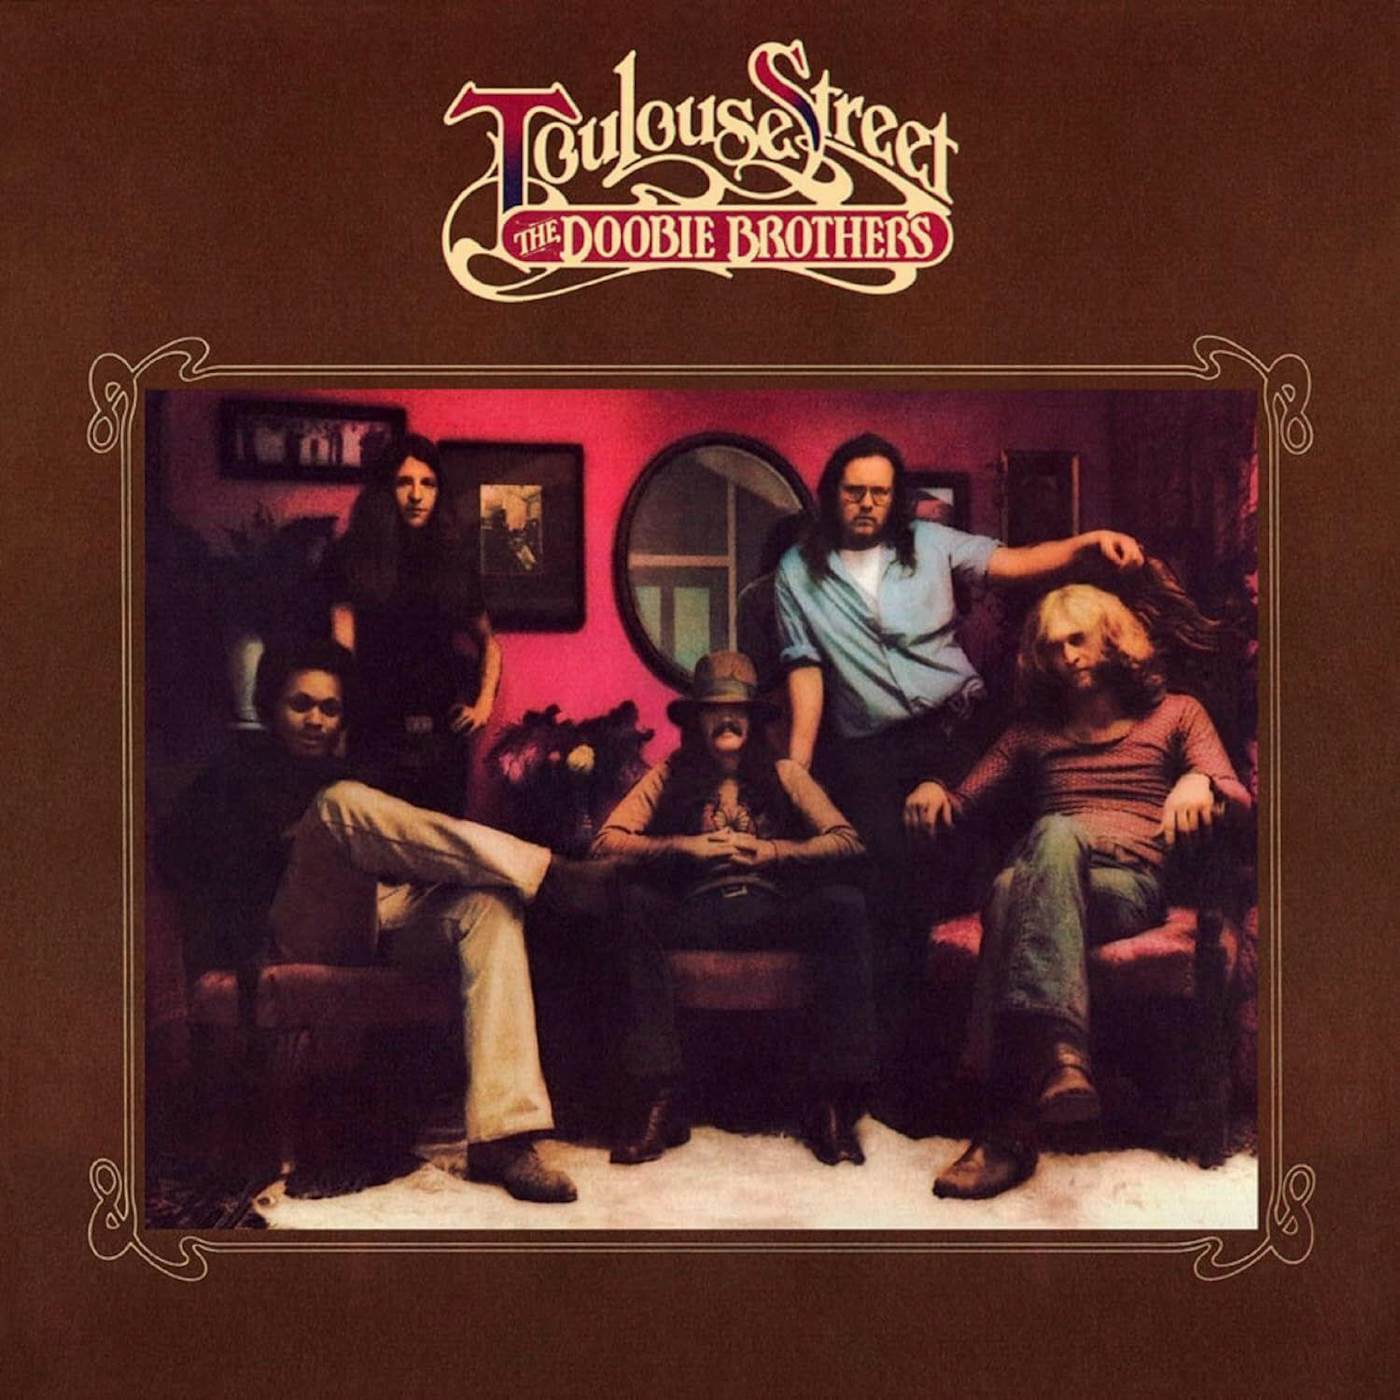 The Doobie Brothers TOULOUSE STREET (LIMITED EDITION) Vinyl Record